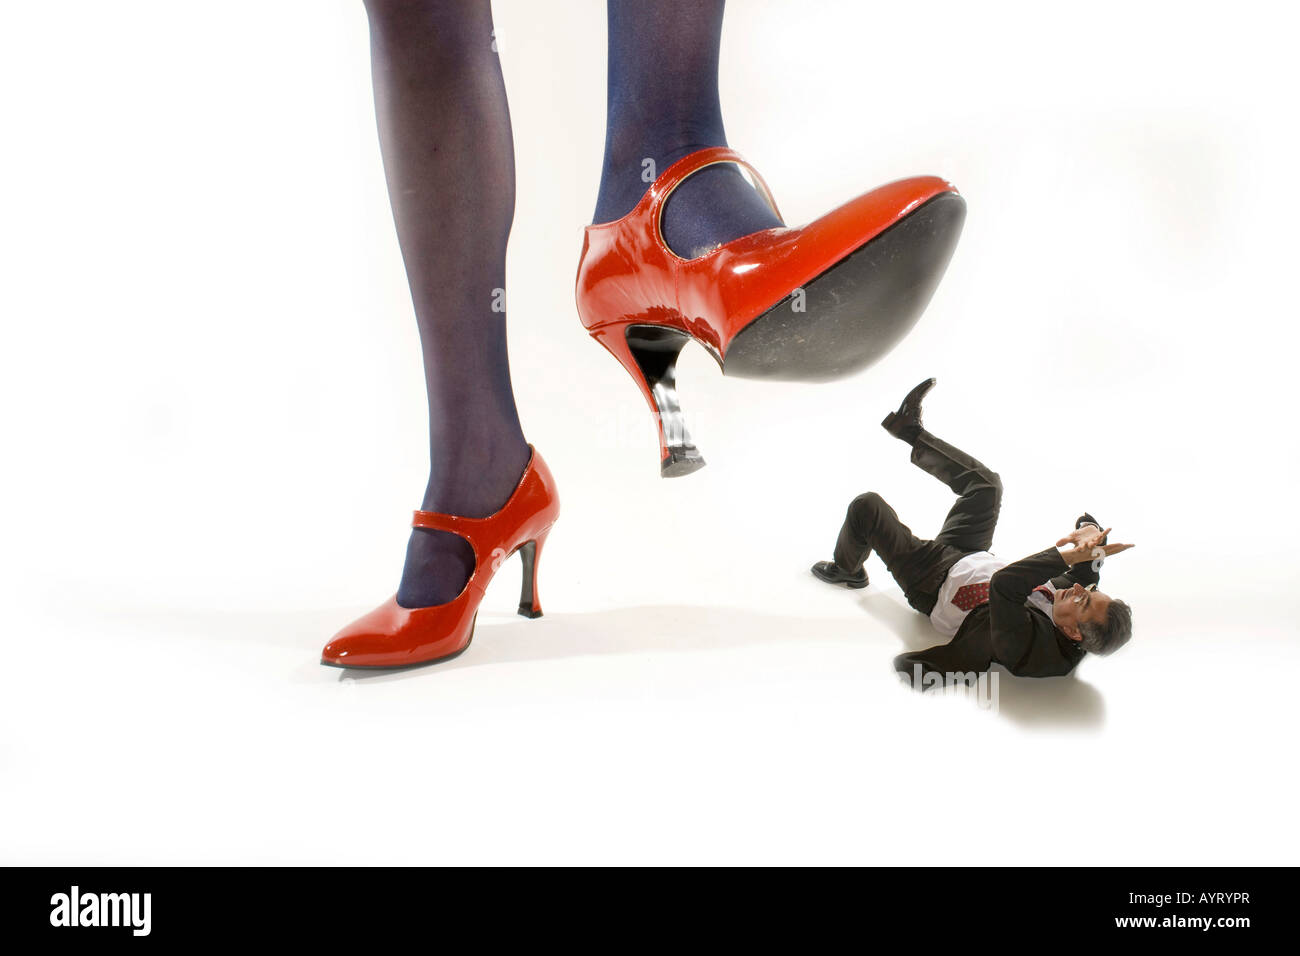 Woman in red high heels stepping on a shrunken man Stock Photo